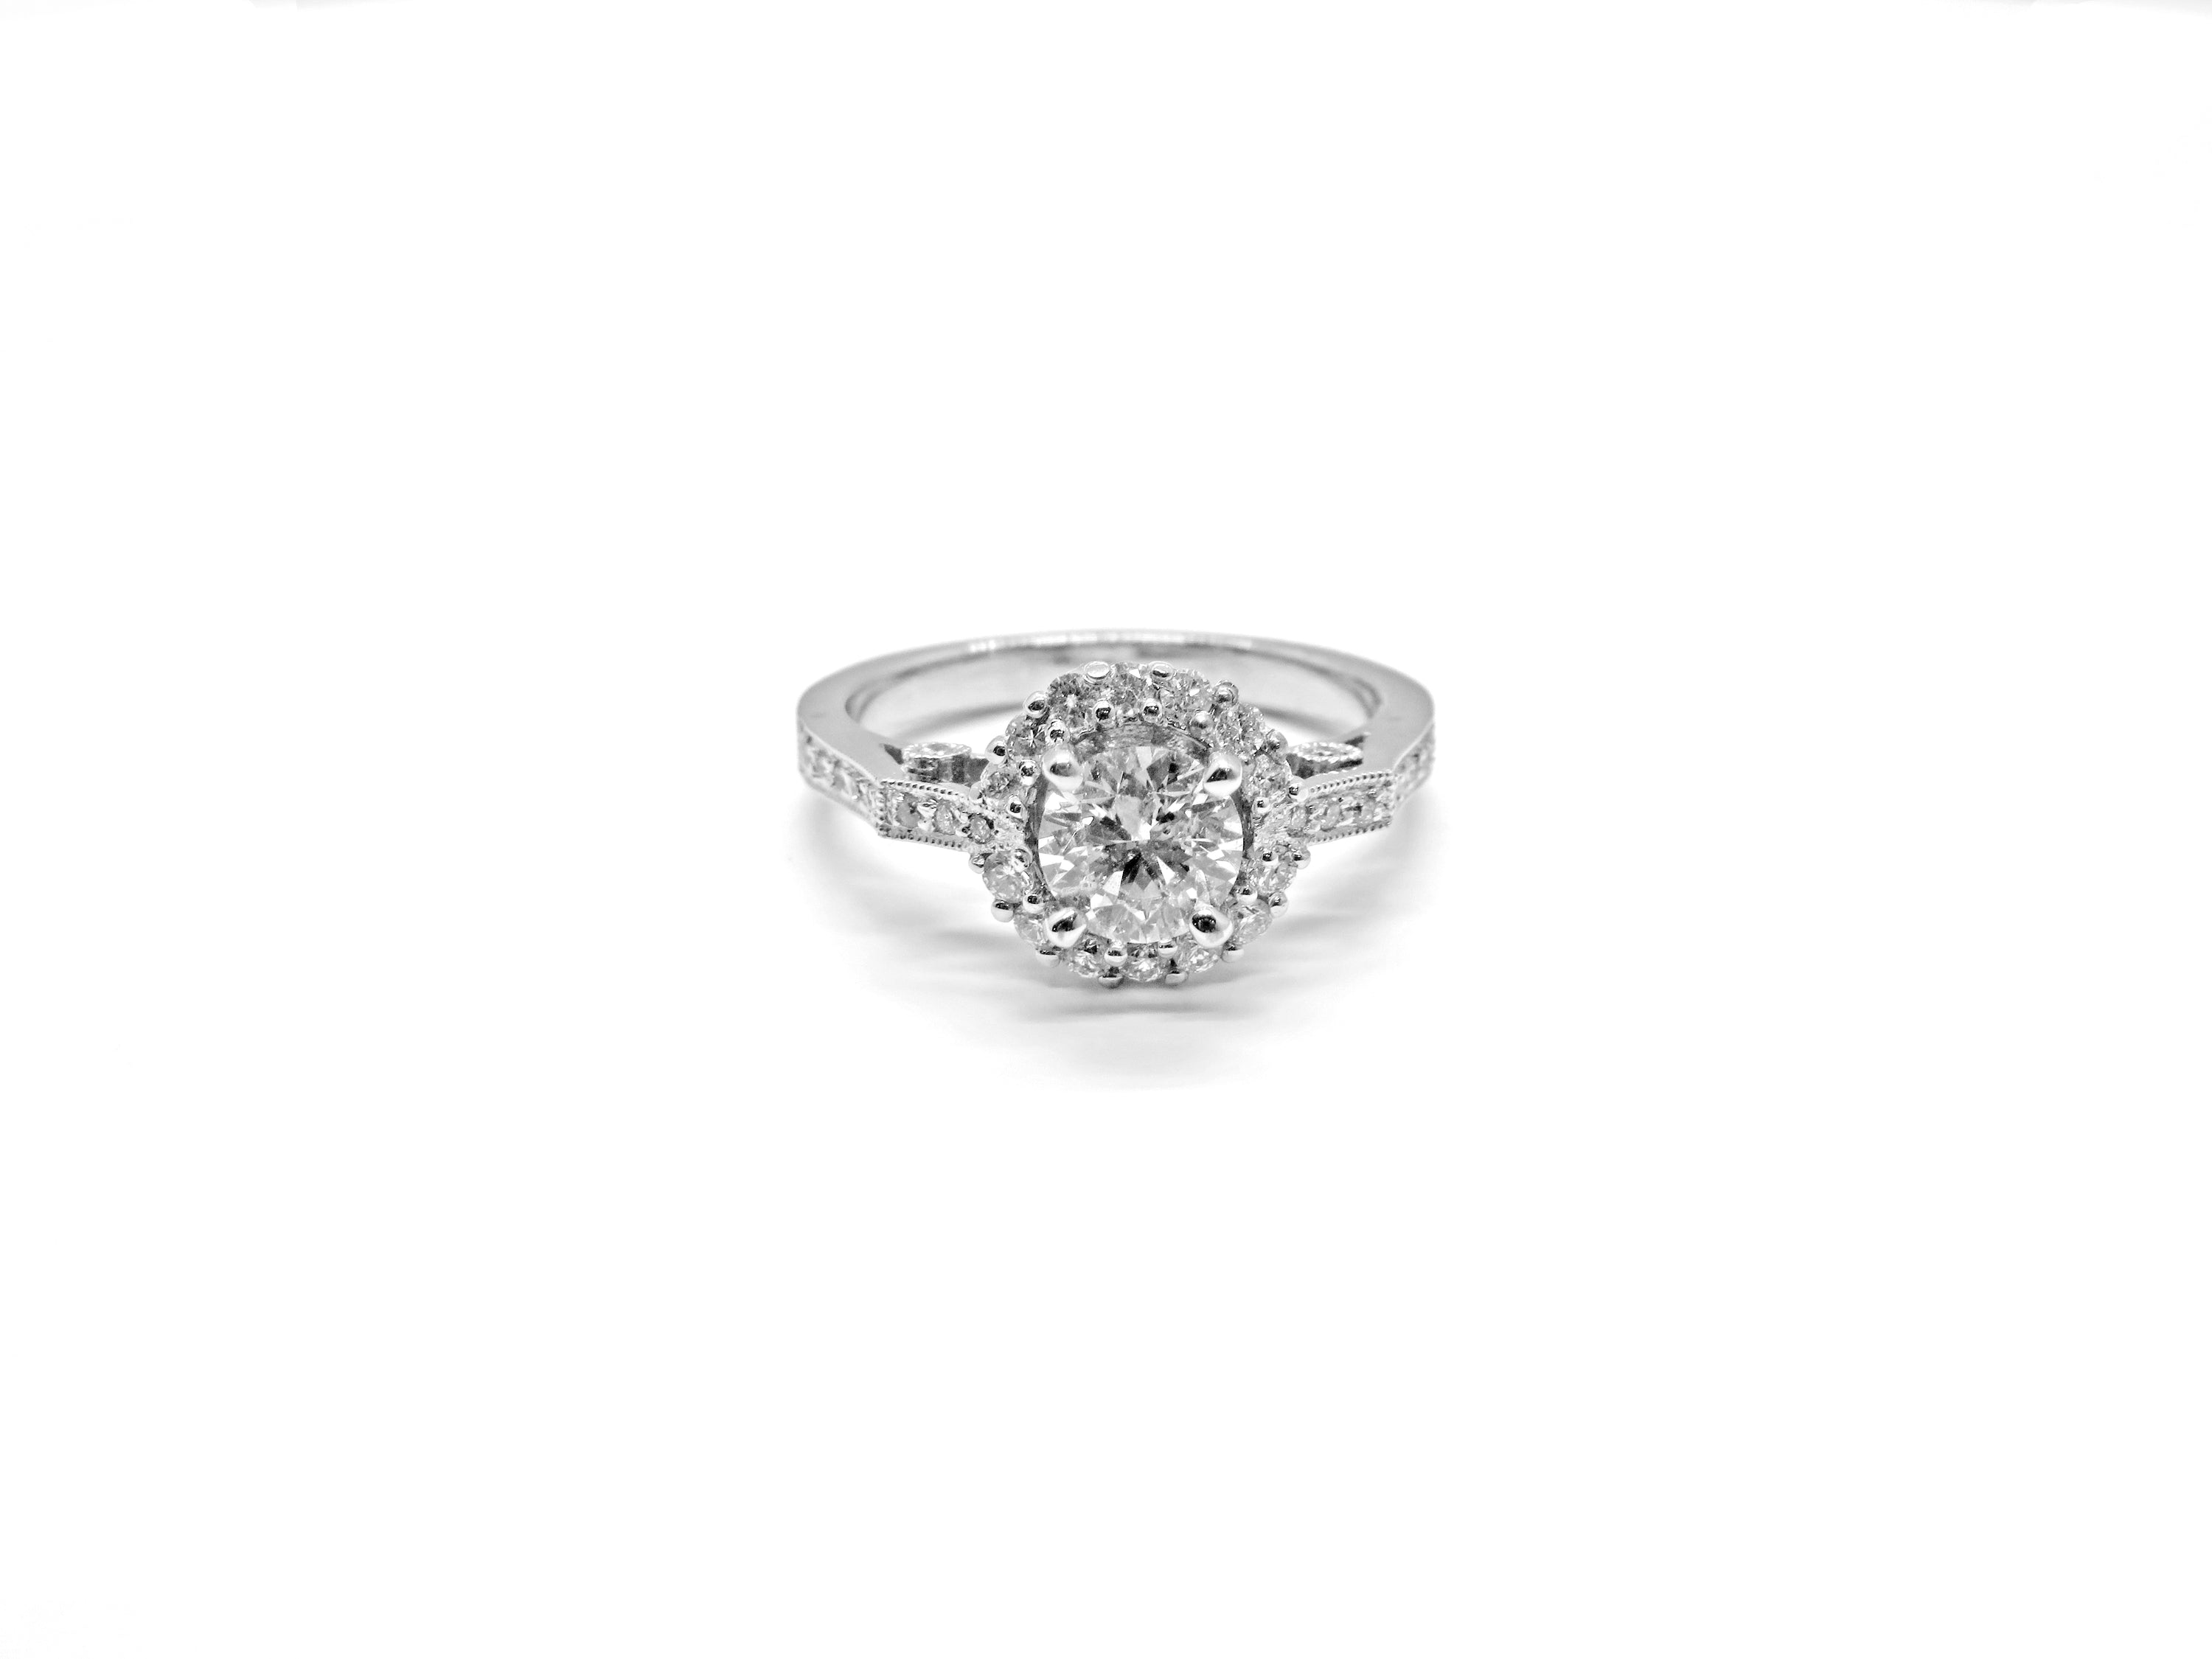 14kt White Gold Round Brilliant Cut Diamond Engagement Ring with Halo Motif